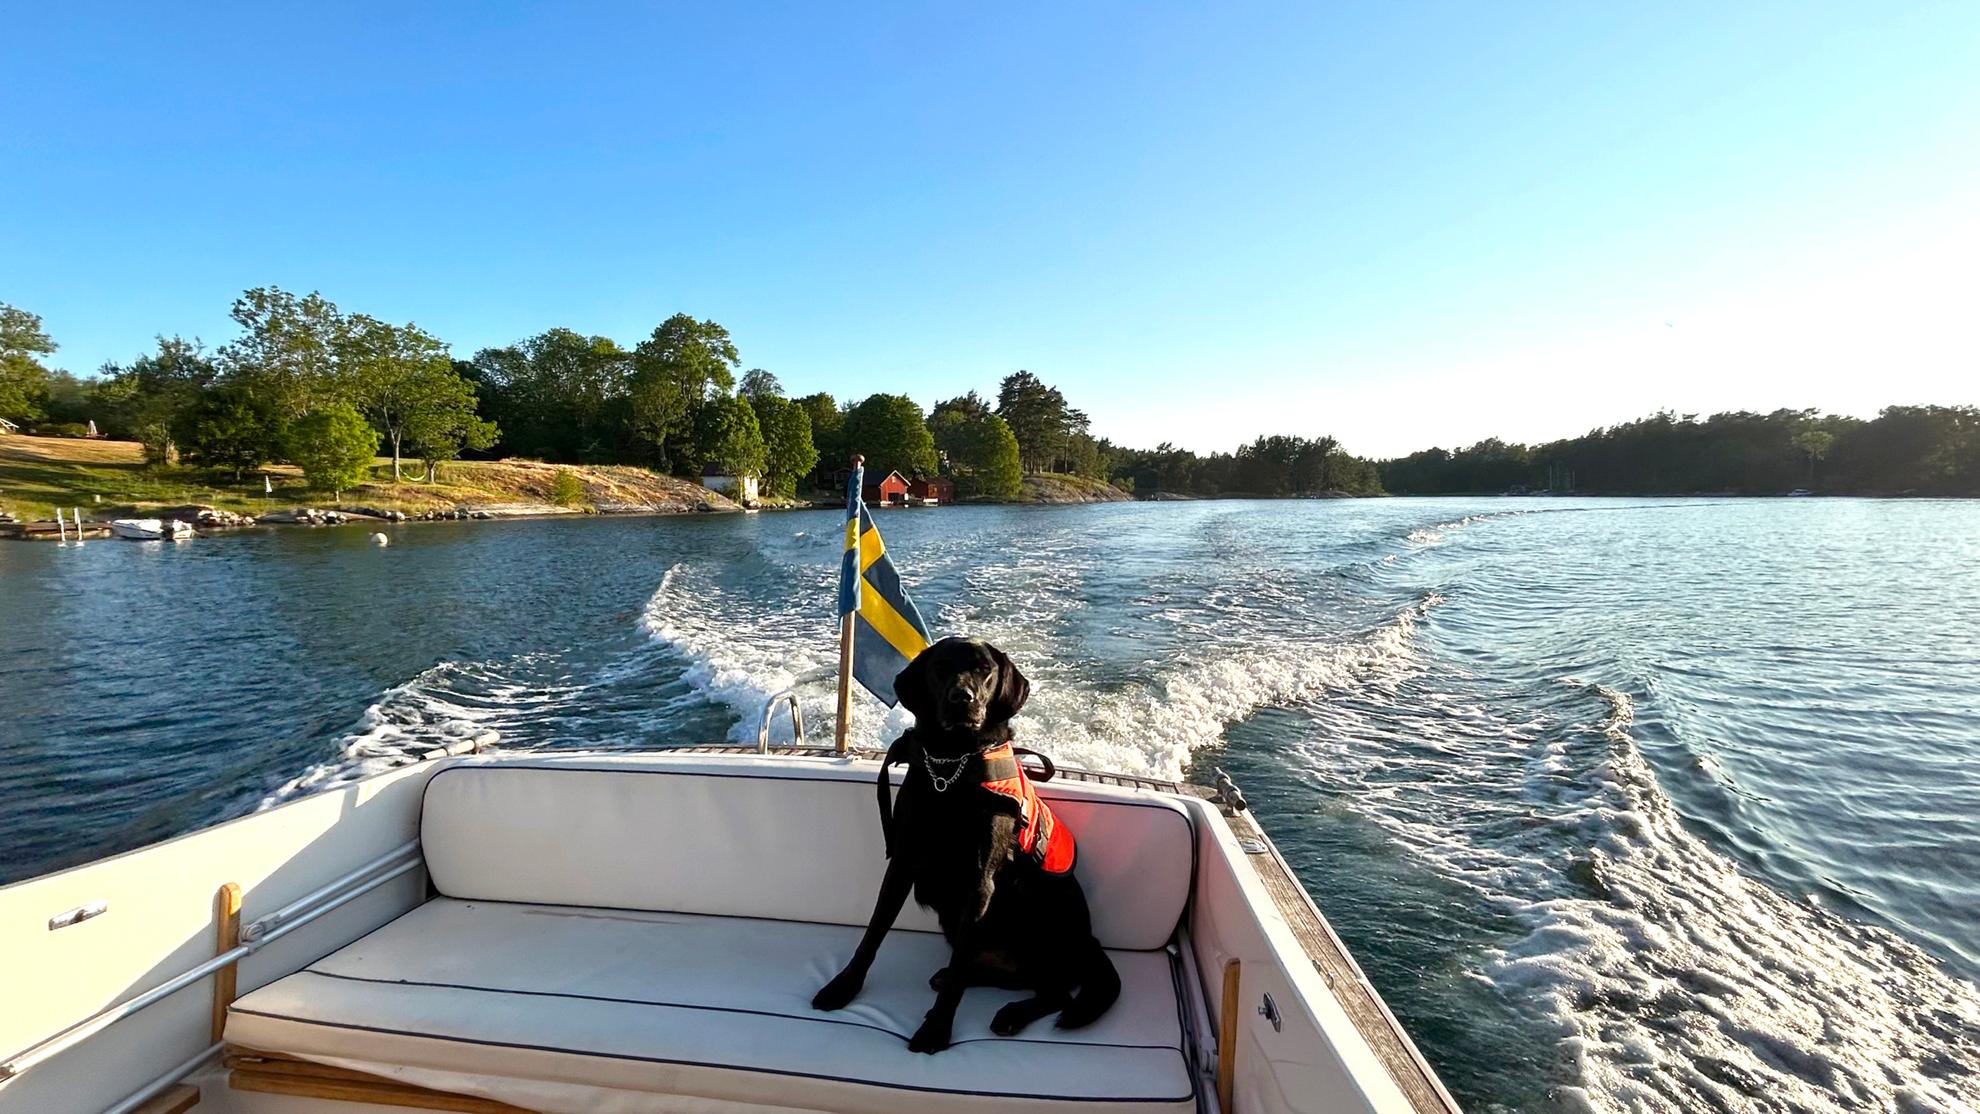 A dog with a lifevest sits in the back of a boat on a sunny summer day.